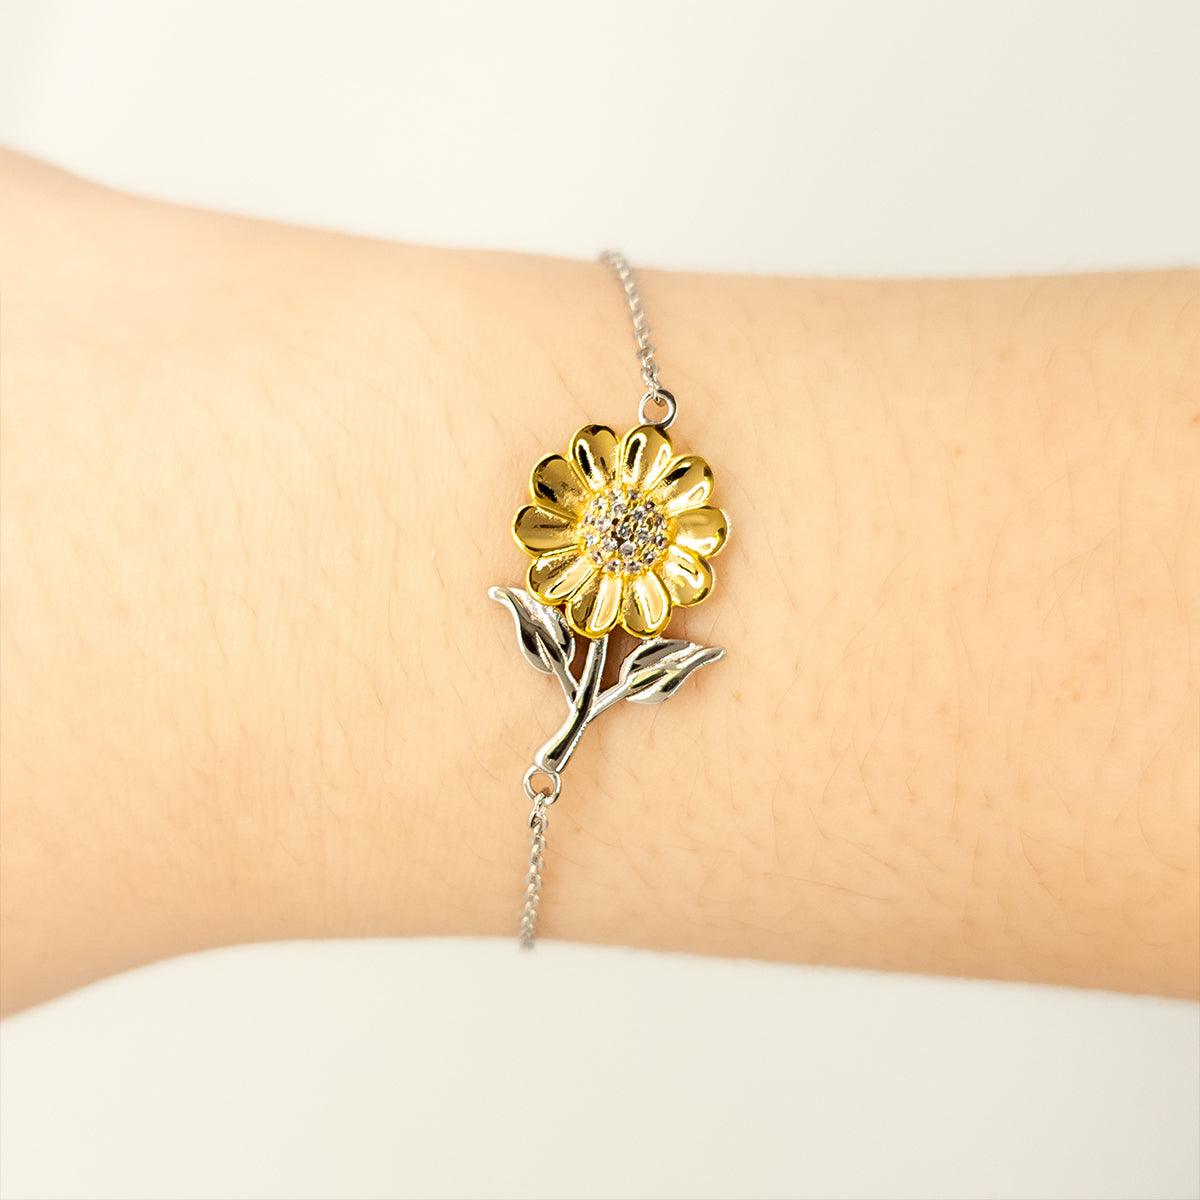 Sarcastic Correctional Officer Sunflower Bracelet Gifts, Christmas Holiday Gifts for Correctional Officer Birthday Message Card, Correctional Officer: Because greatness is woven into the fabric of every day, Coworkers, Friends - Mallard Moon Gift Shop